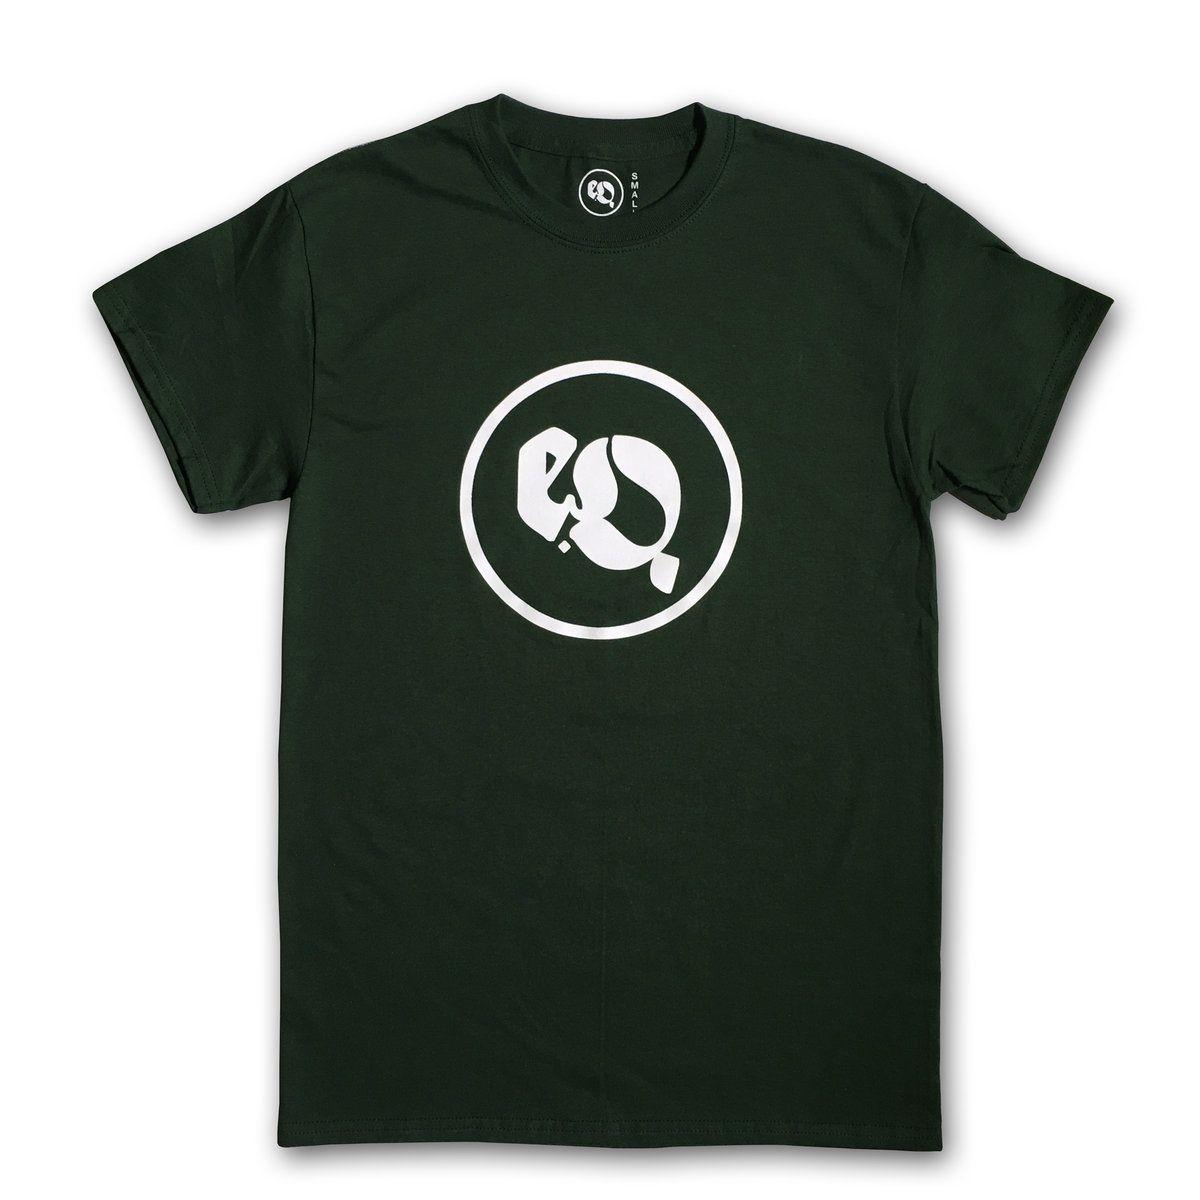 Green Q Logo - expansions of Q Logo Tee - Forest Green - expansionsofq.net